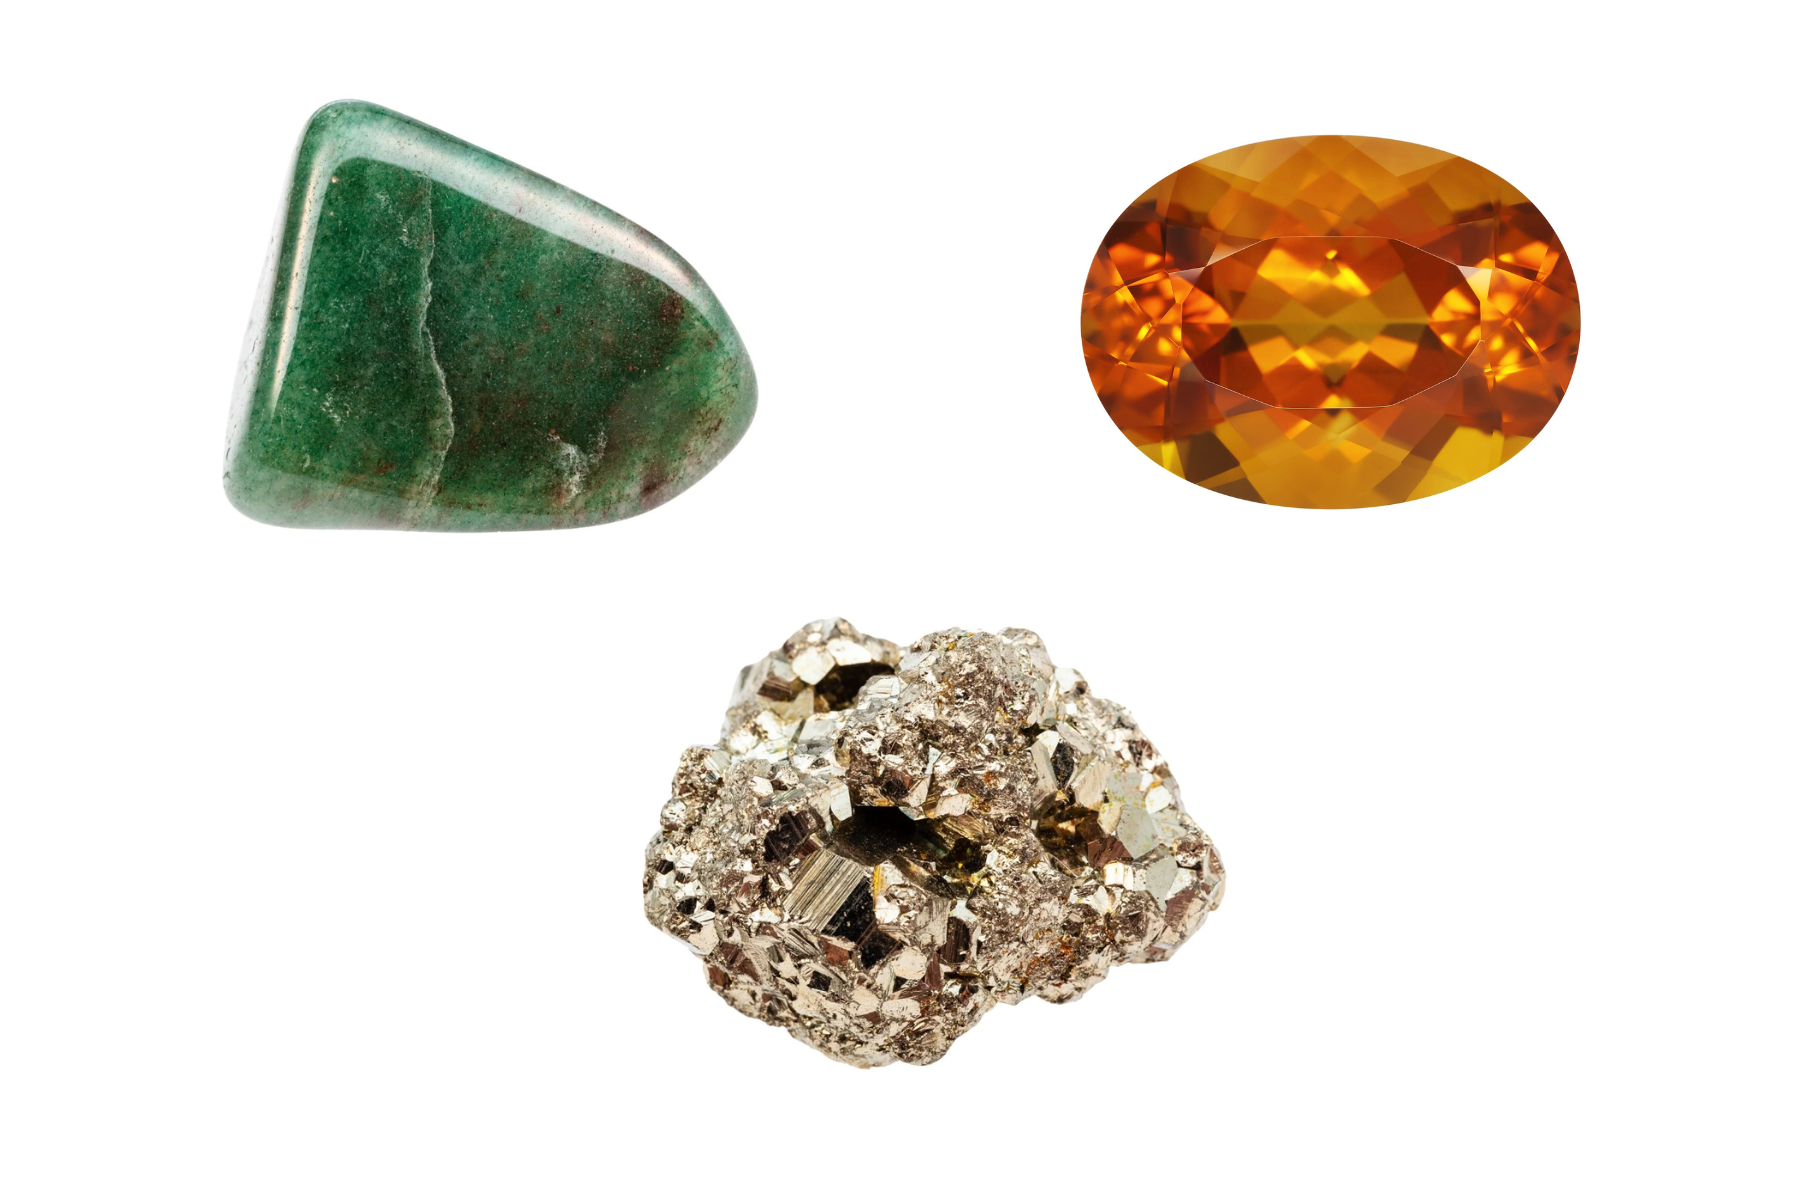 Three distinct crystals for attracting good fortune